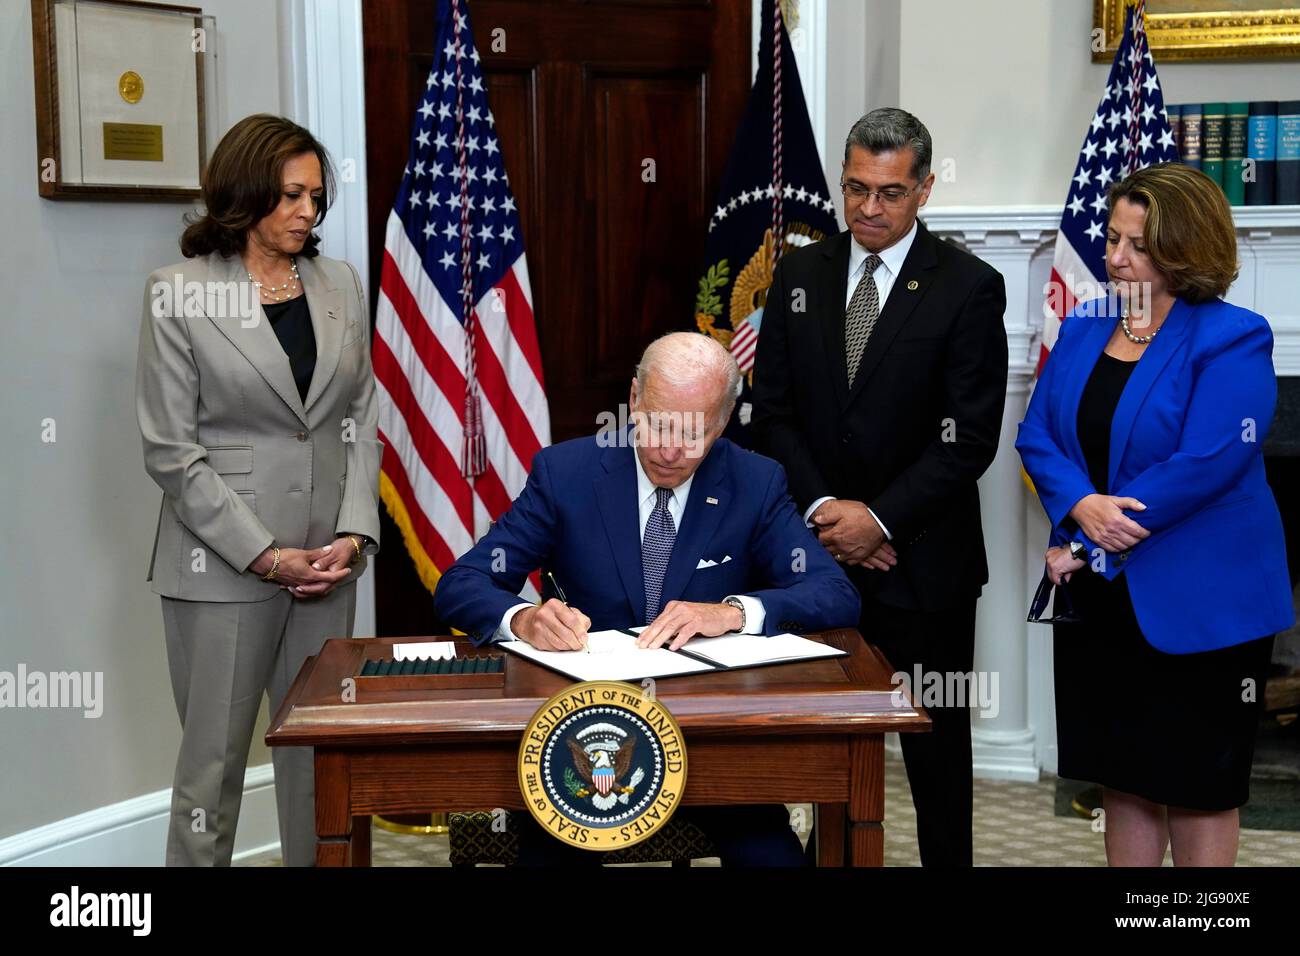 United States President Joe Biden signs the executive order on access to reproductive health care services in the Roosevelt Room at the White House in Washington on July 8, 2022. Behind the President are Vice President Kamala Harris, Health and Human Services Secretary Xavier Becerra and Deputy Attorney General Lisa Monaco. Credit: Yuri Gripas/Pool via CNP /MediaPunch Stock Photo